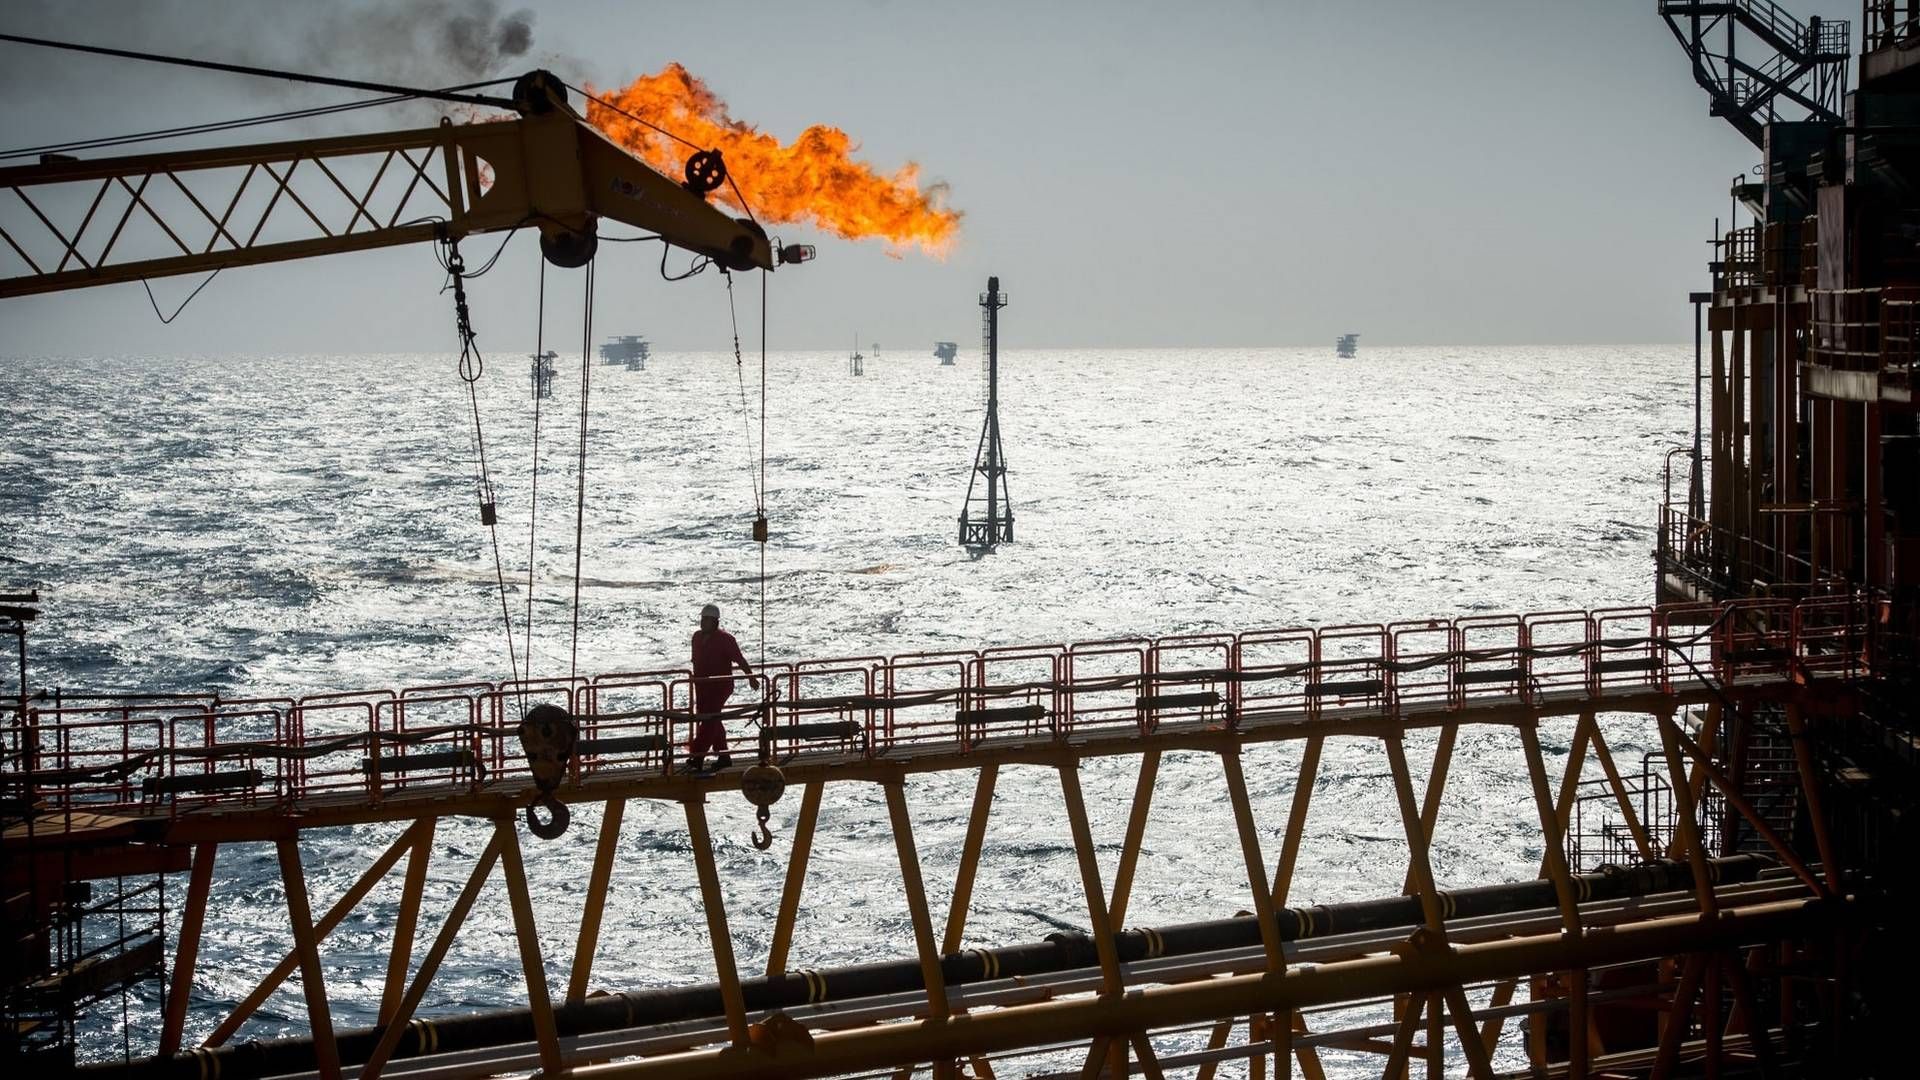 OPEC members consider suspending Russia from oil deal. | Photo: Bloomberg/Bloomberg